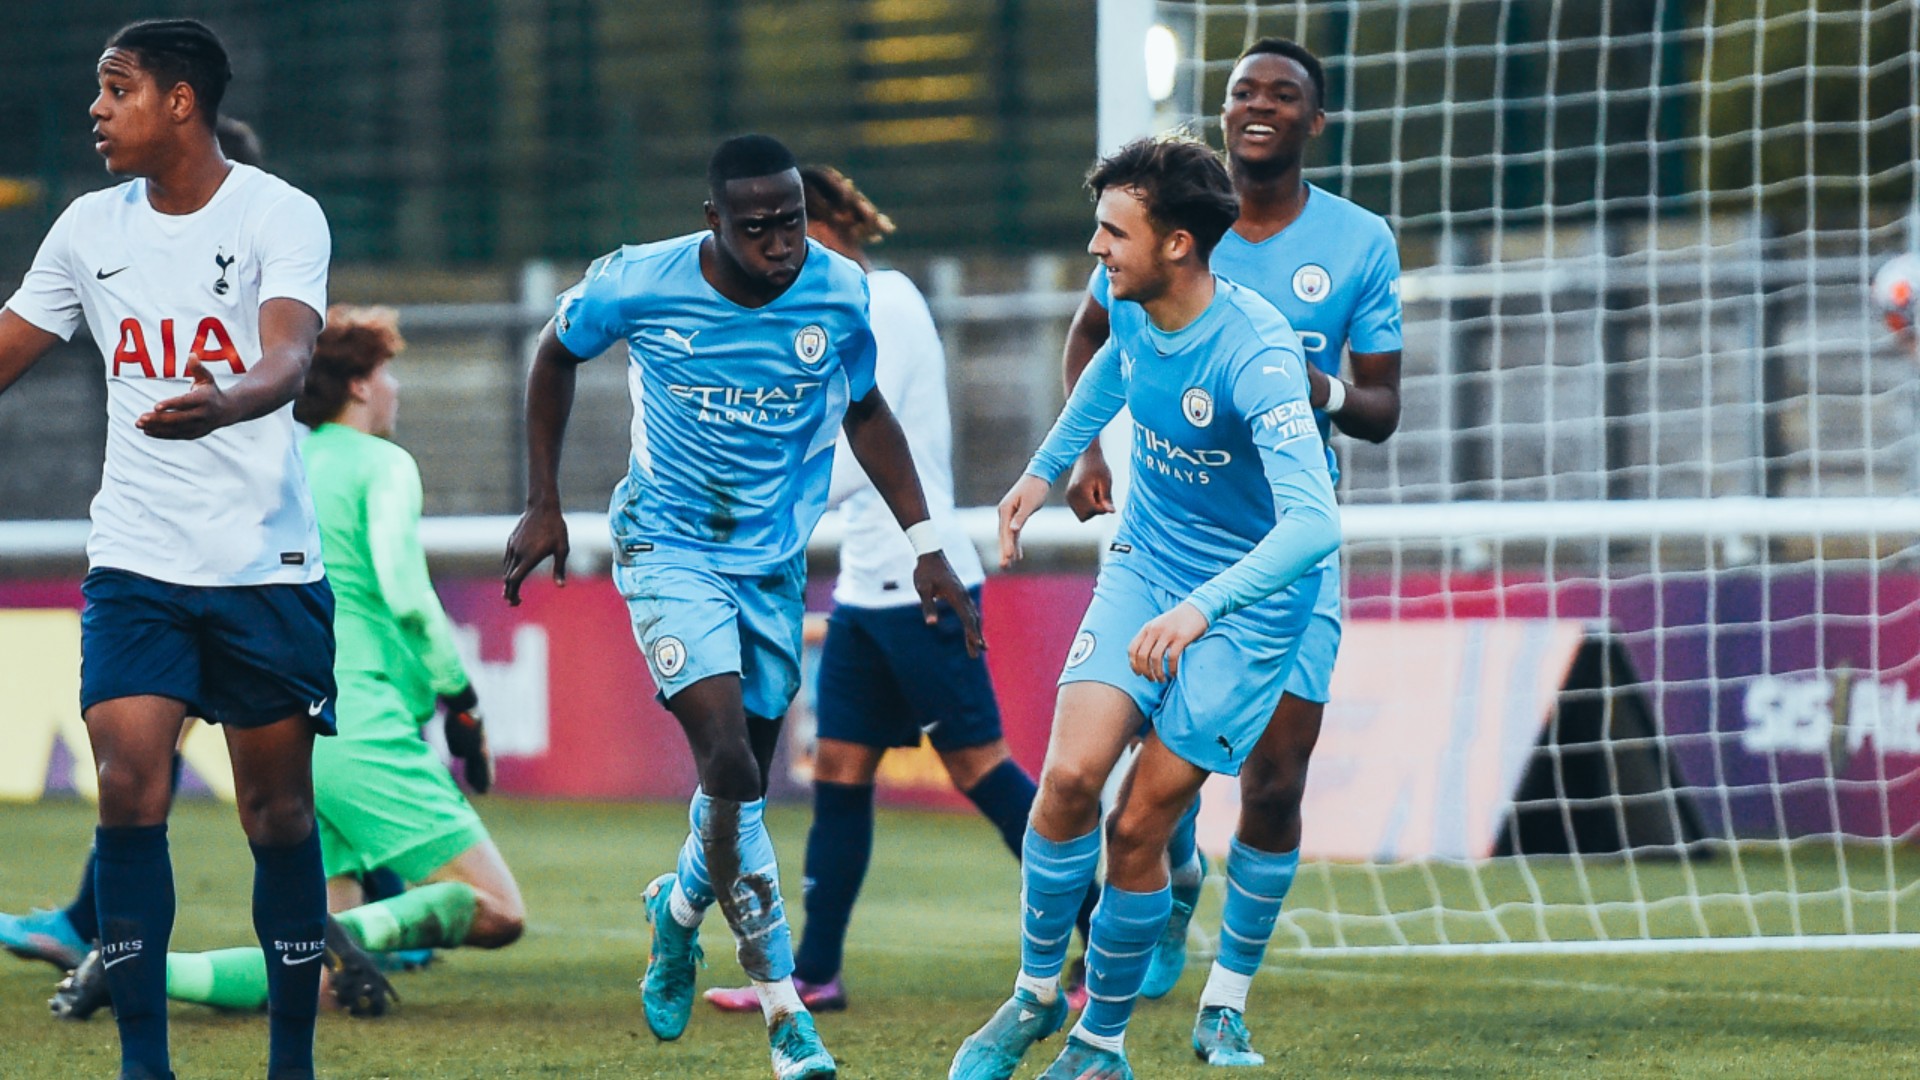 DOUBLE DELIGHT: Carlos Borges celebrates after scoring City's second goal